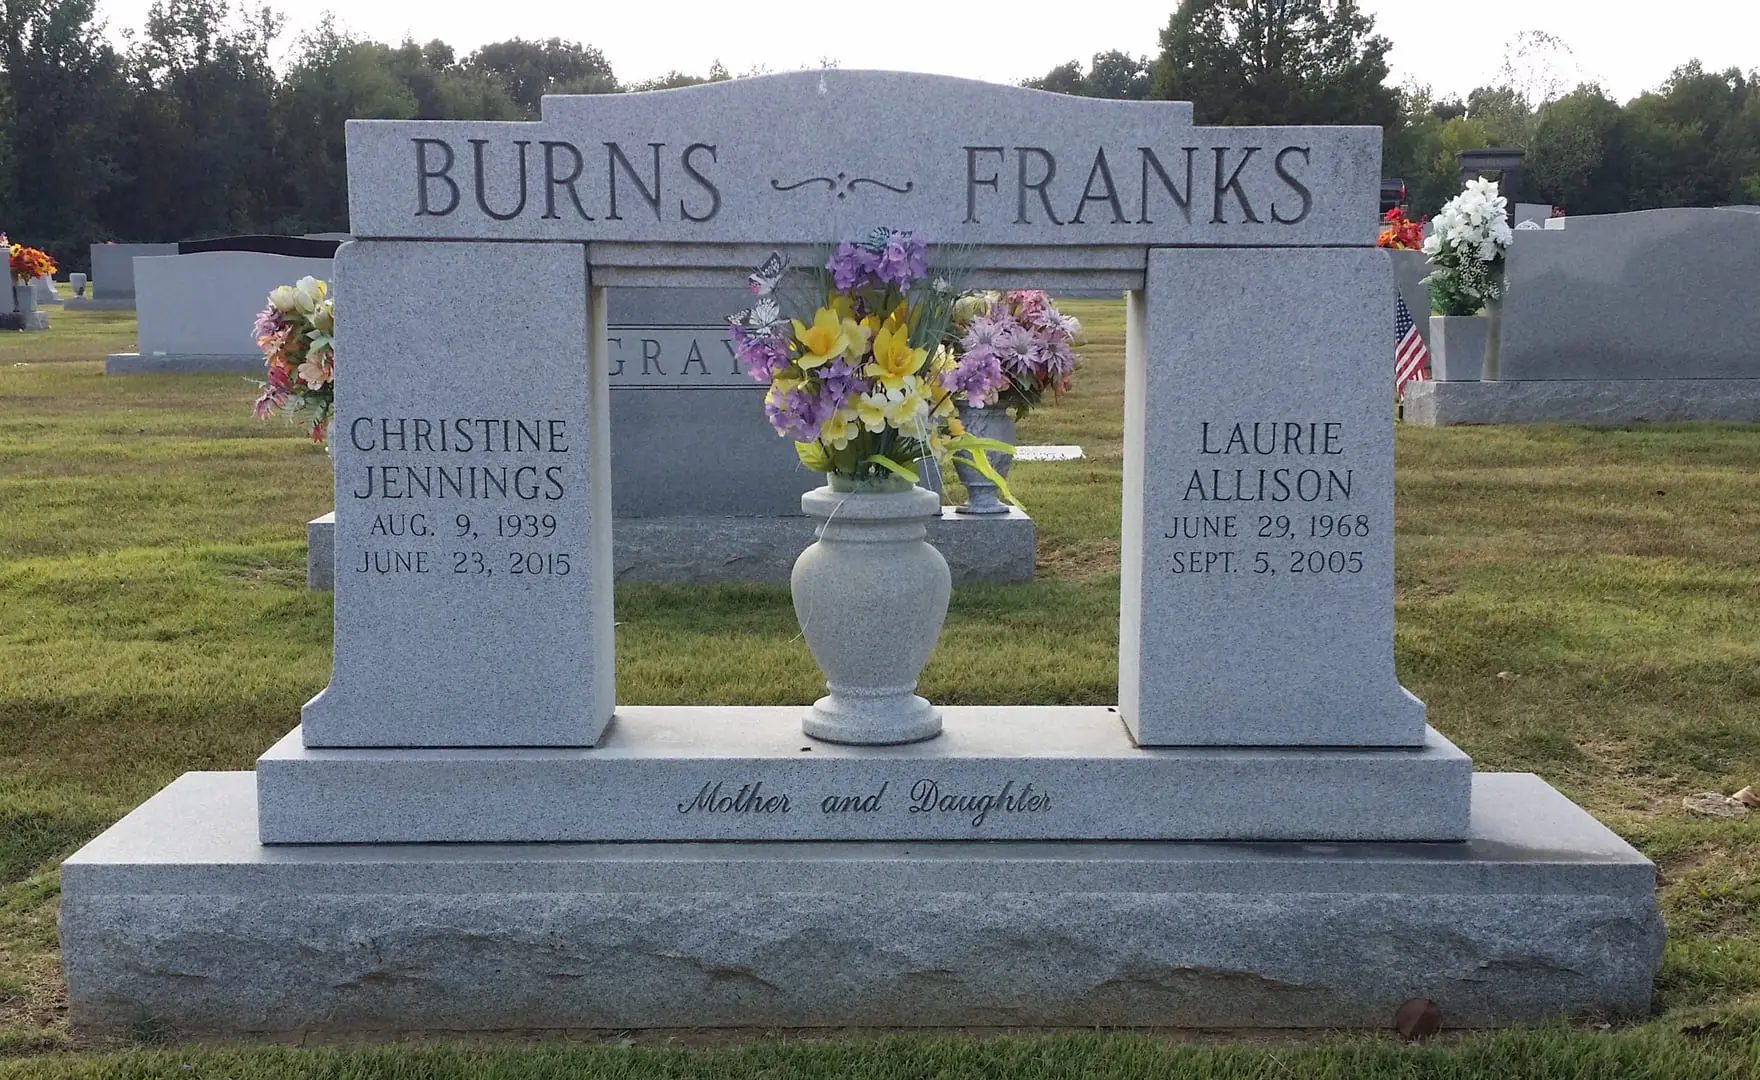 A memorial slab for Christine Jennings and Laurie Allison